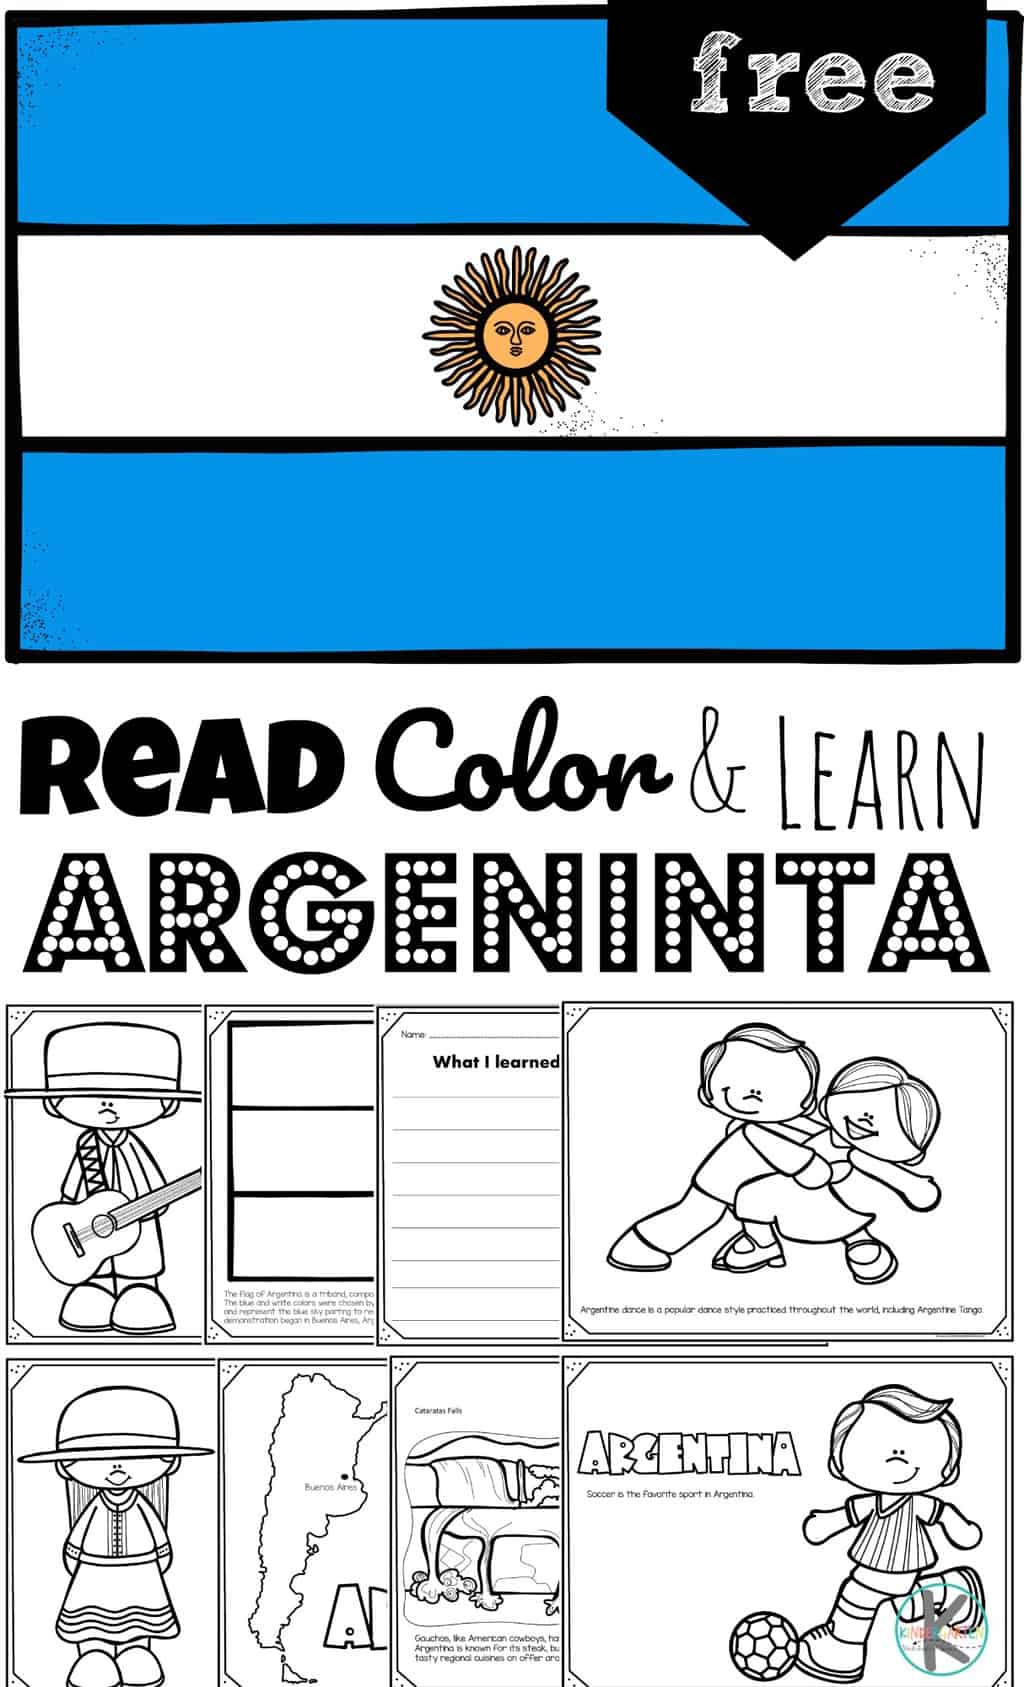 Free argentina coloring page for kids to read color and learn